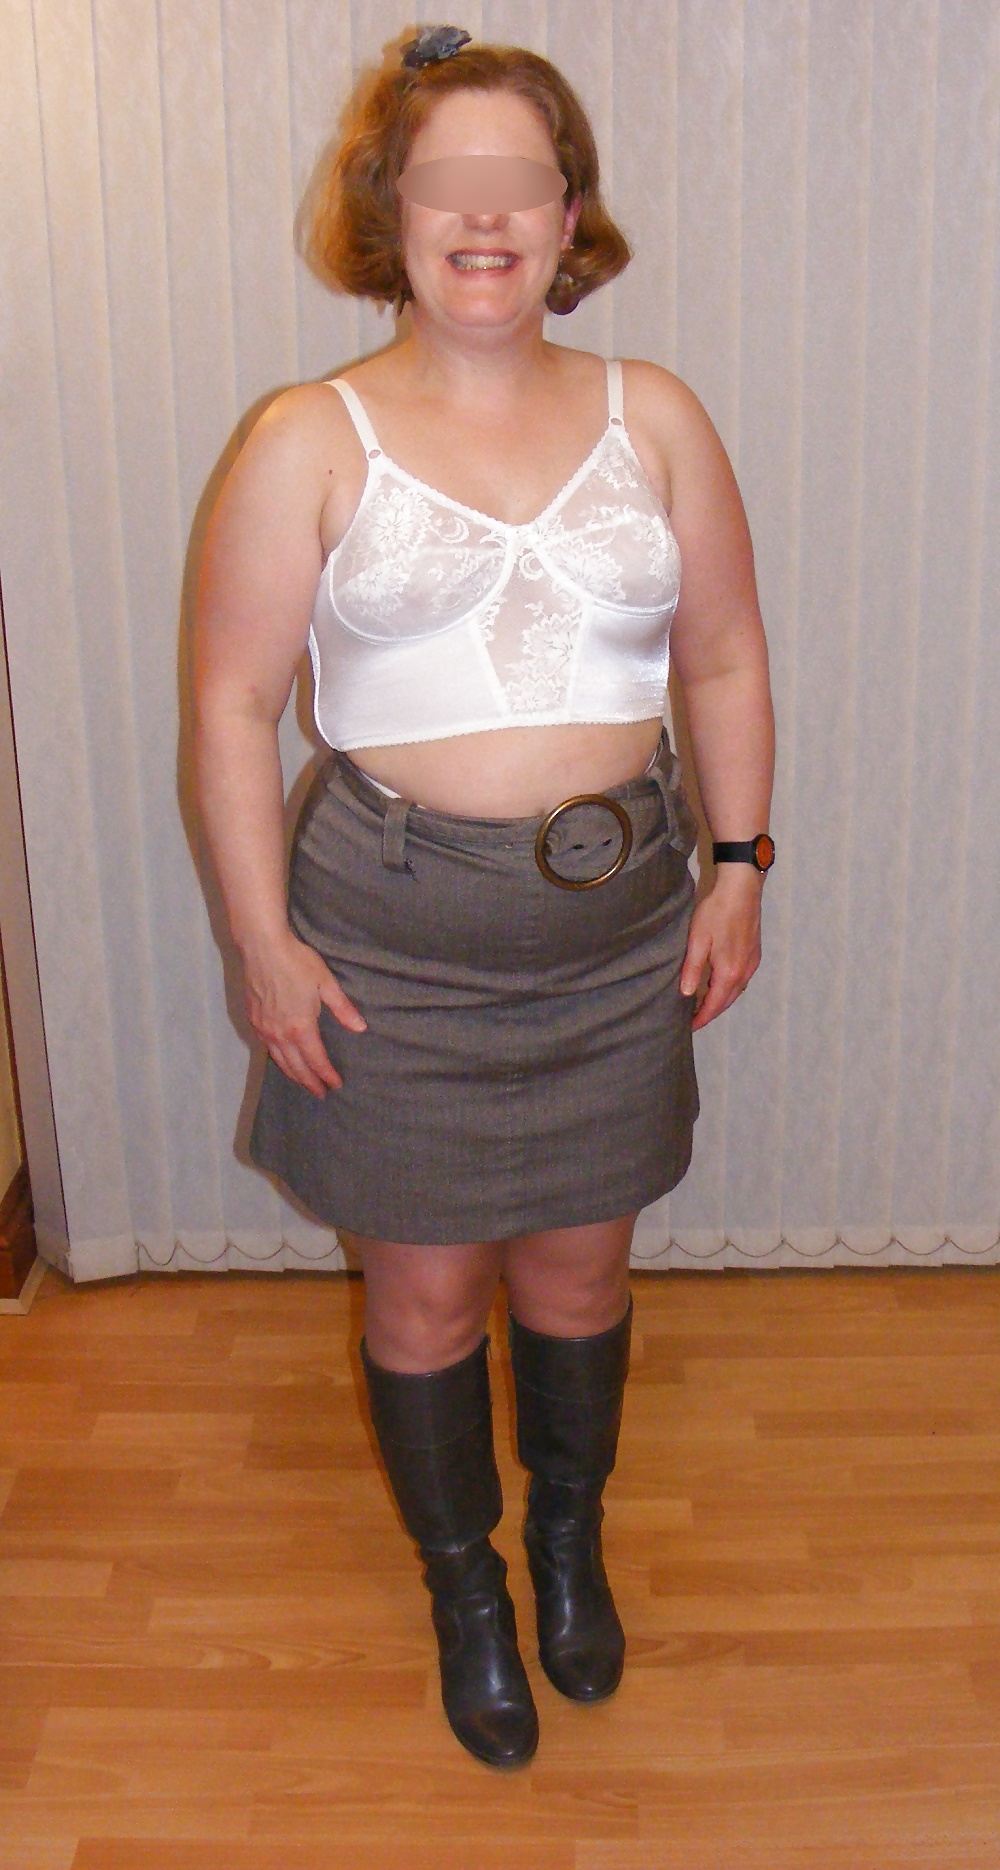 Slutty secretary in girdle, stockings, and boots #17413378